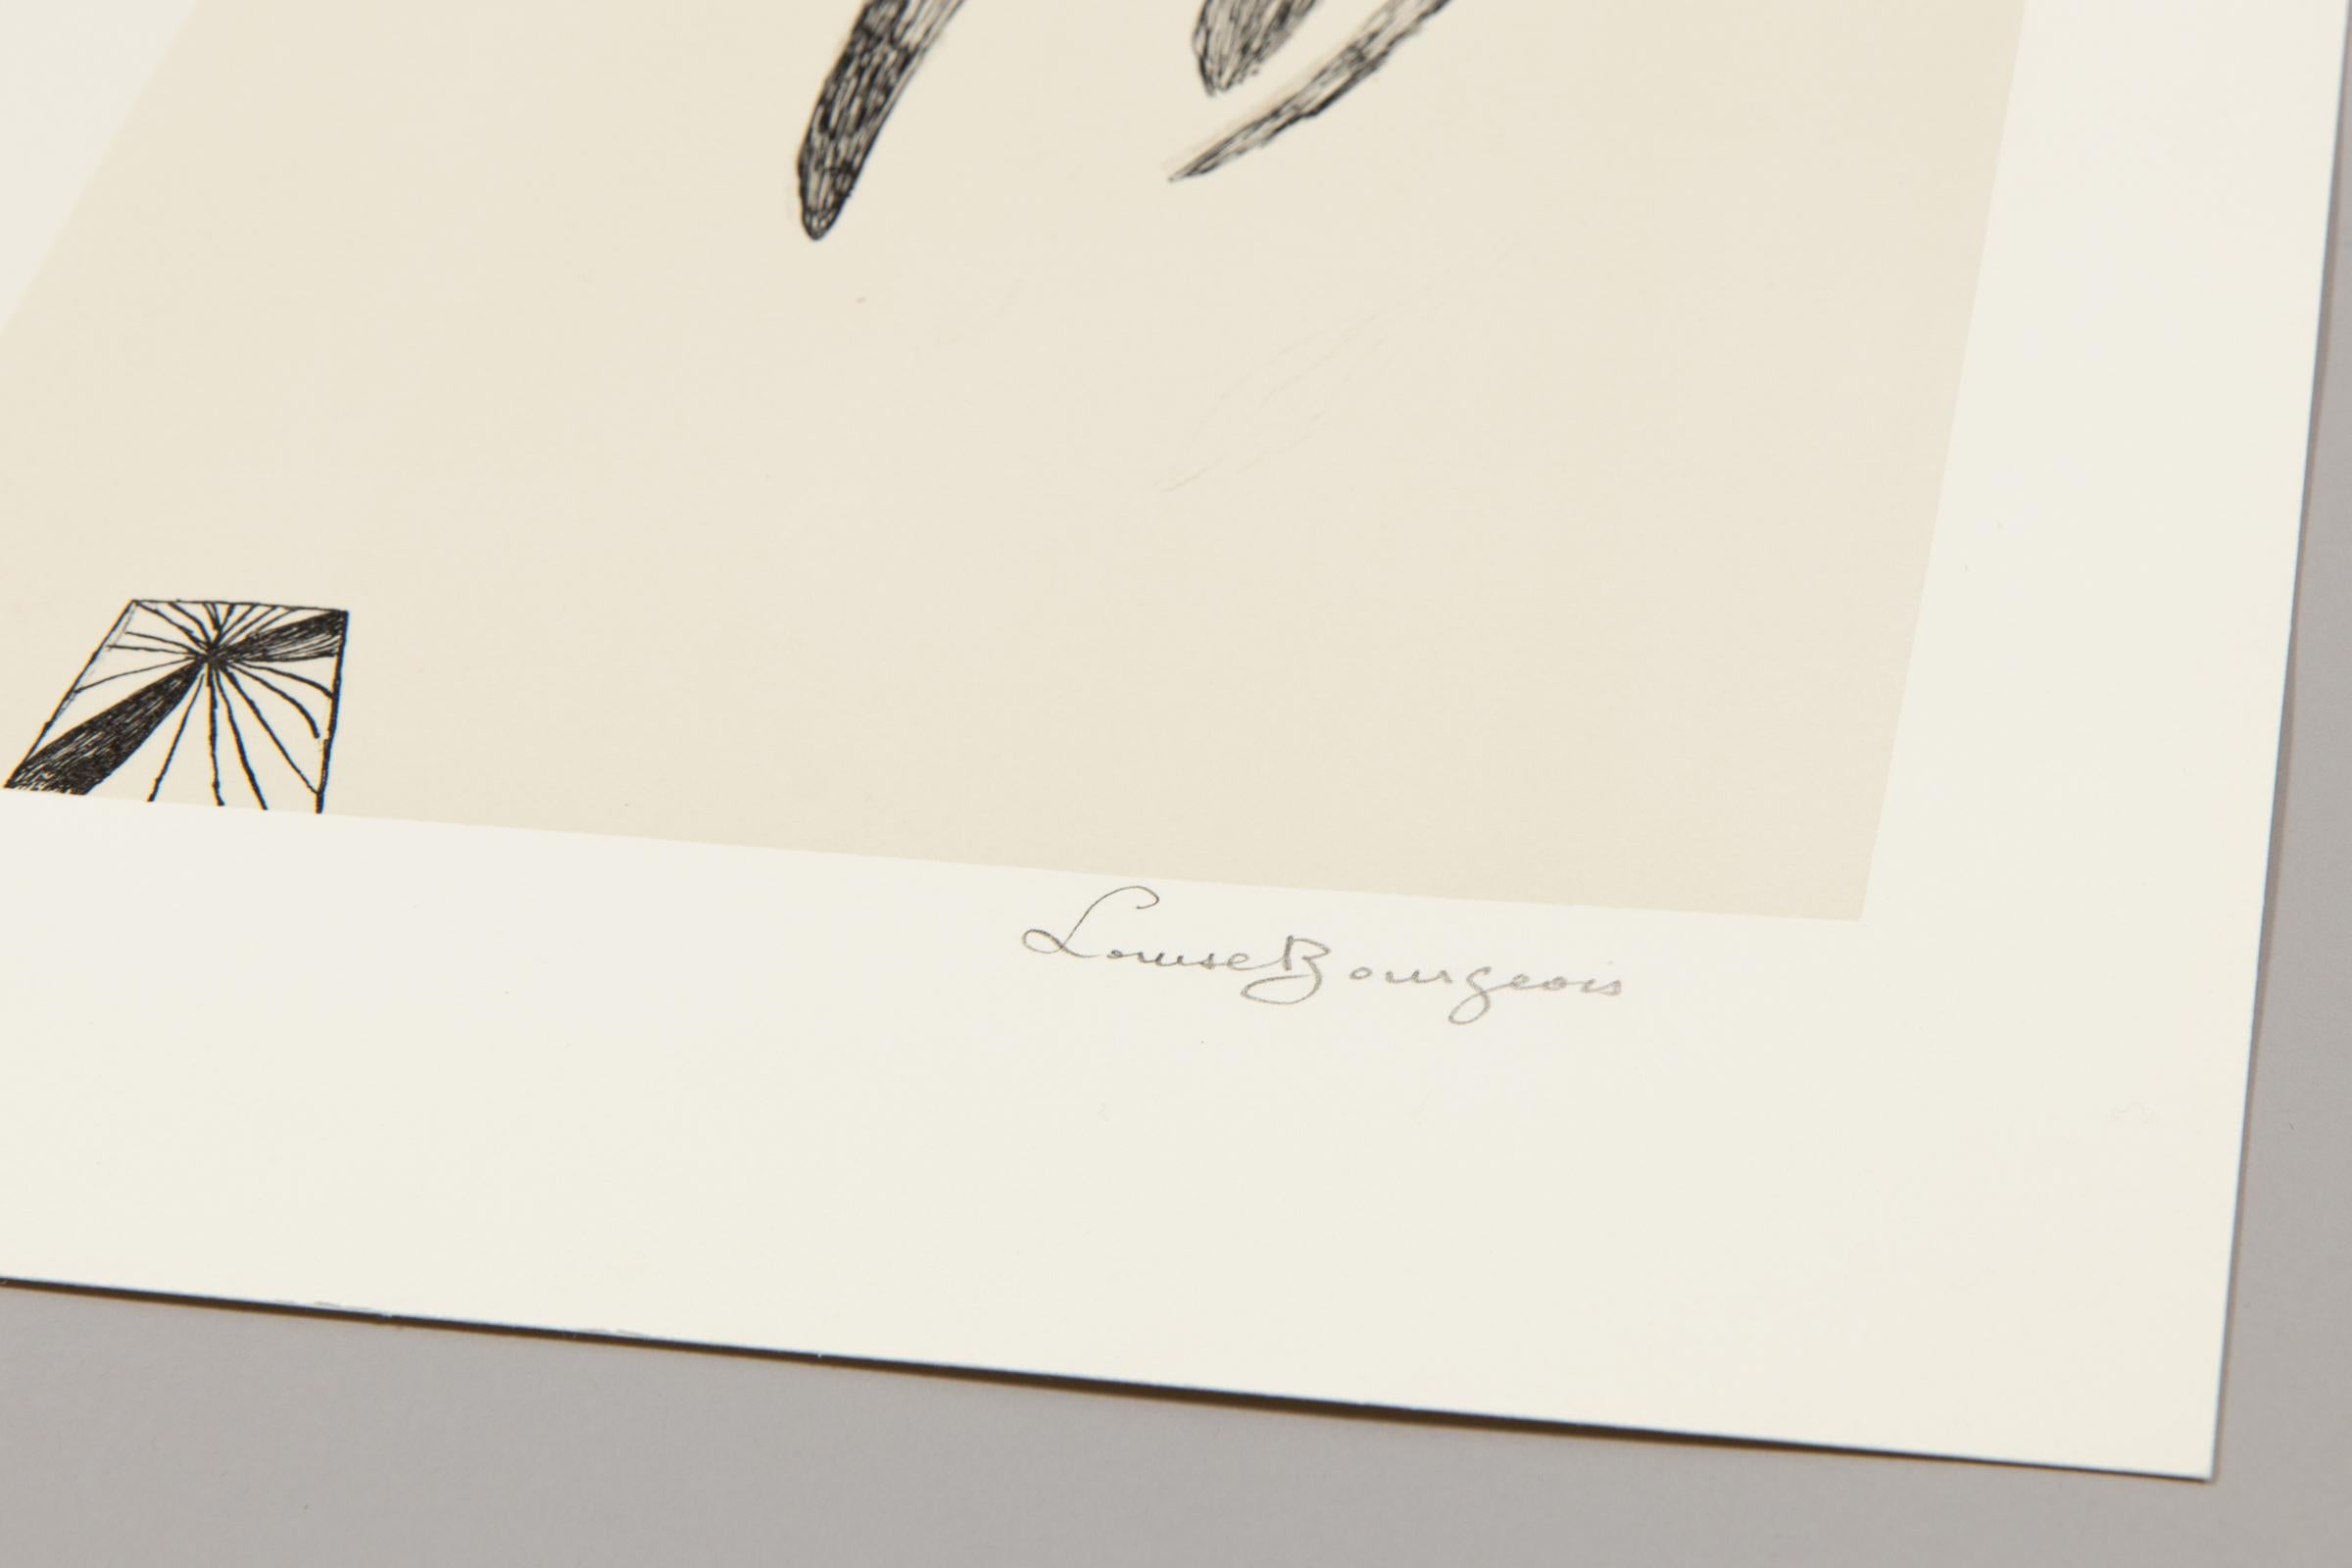 Louise Bourgeois, Sheaves (Version 1) - Original Hand-signed Print For Sale 2